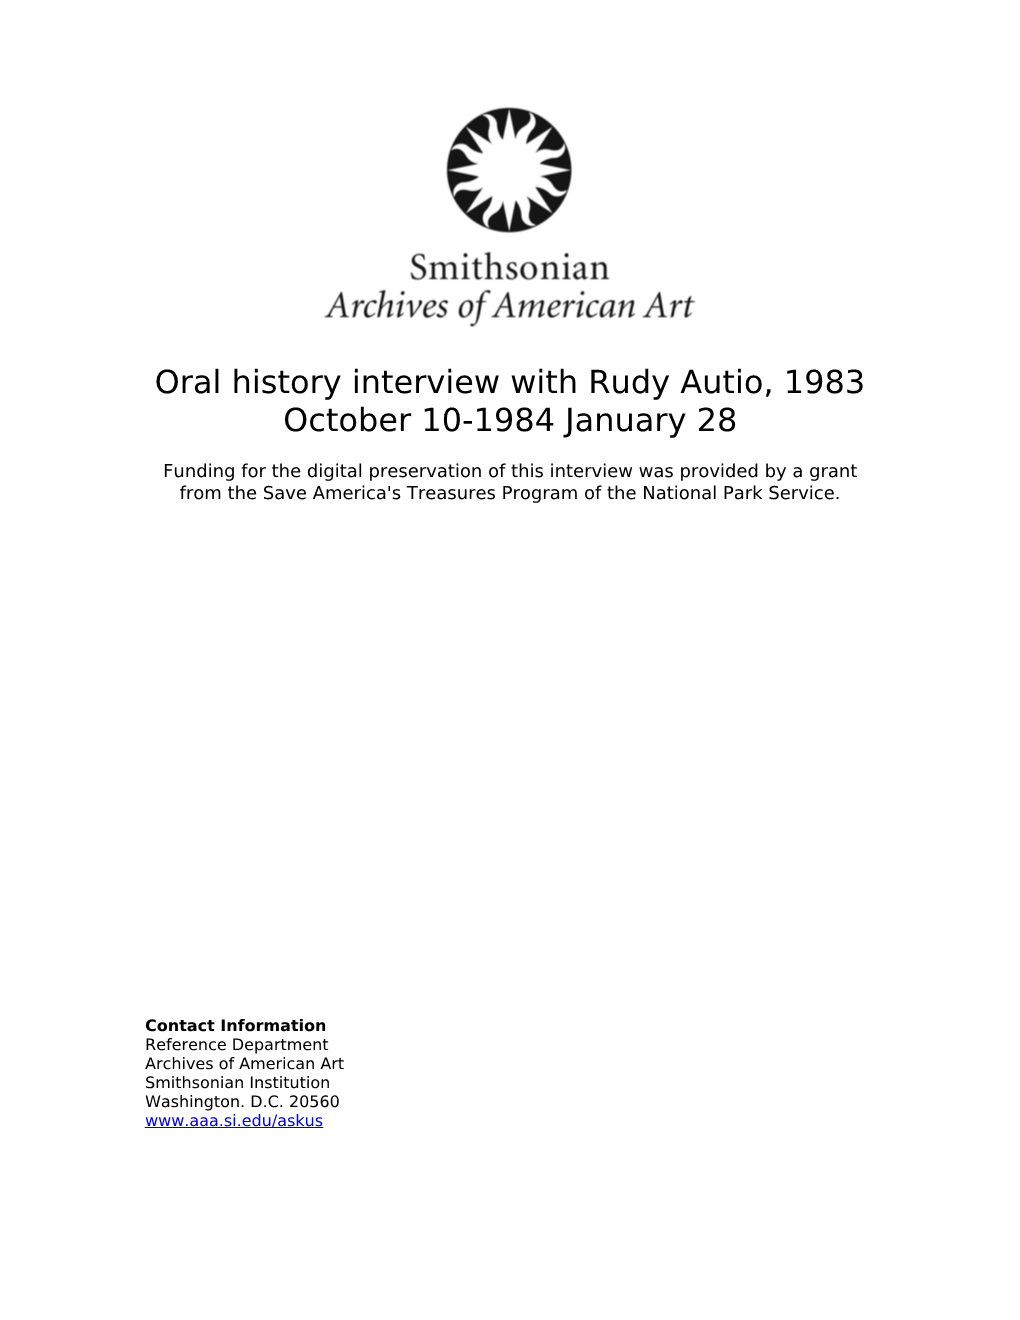 Oral History Interview with Rudy Autio, 1983 October 10-1984 January 28